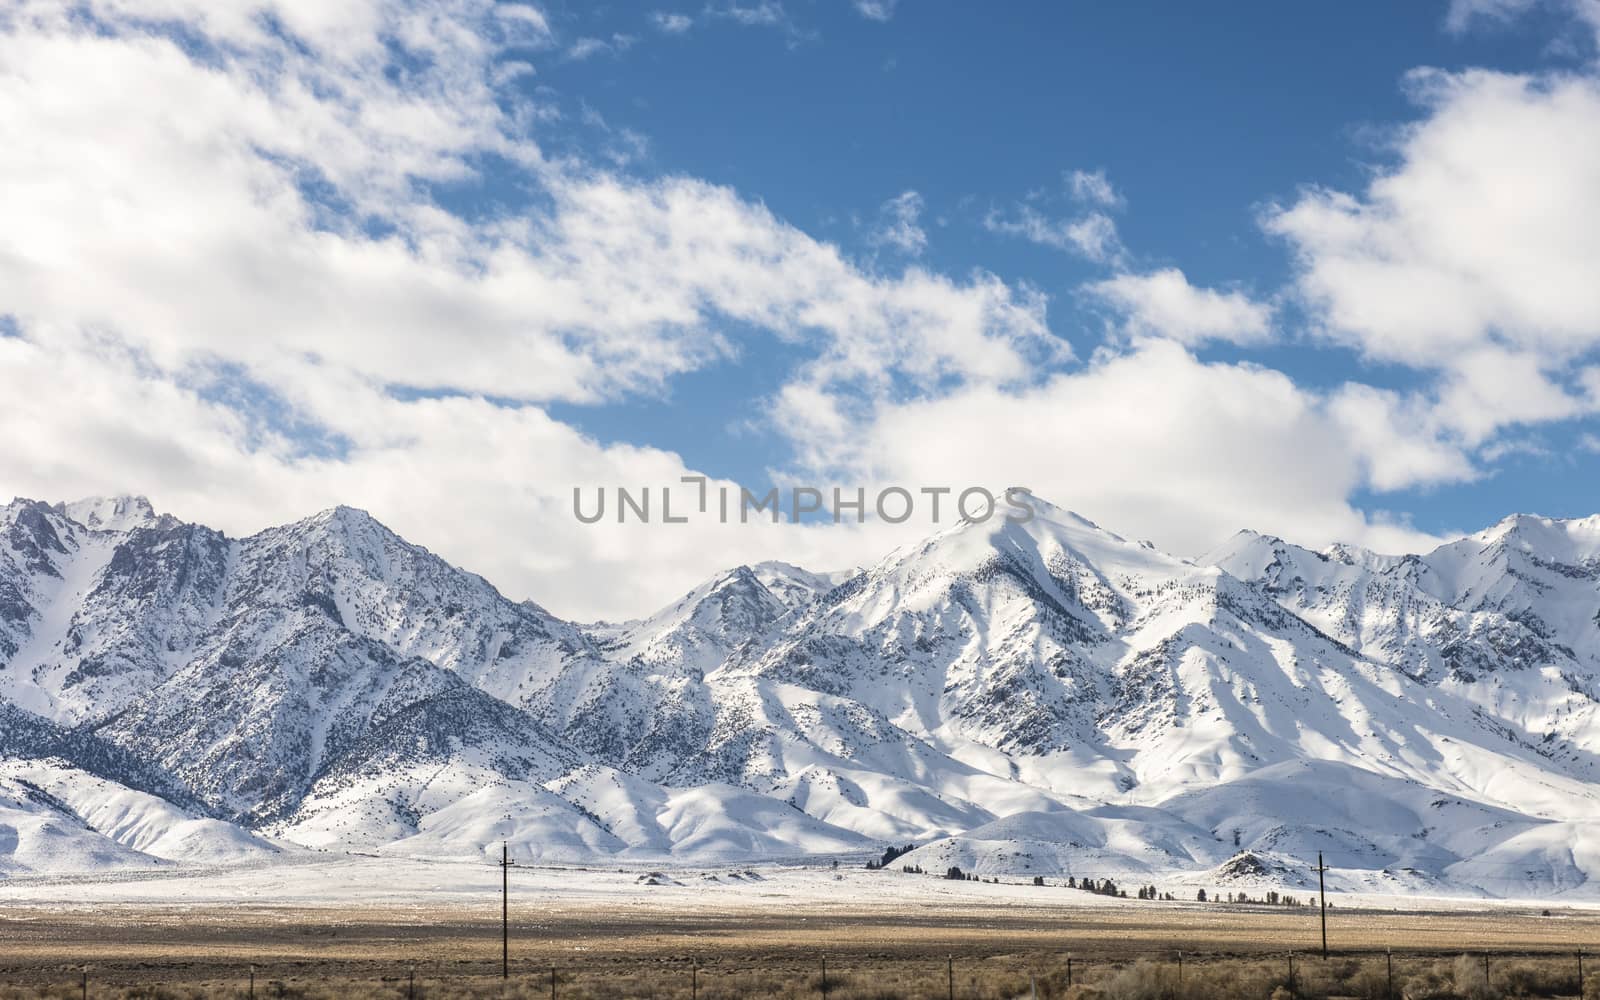 View of the SIerras in winter from highway 395 by Njean